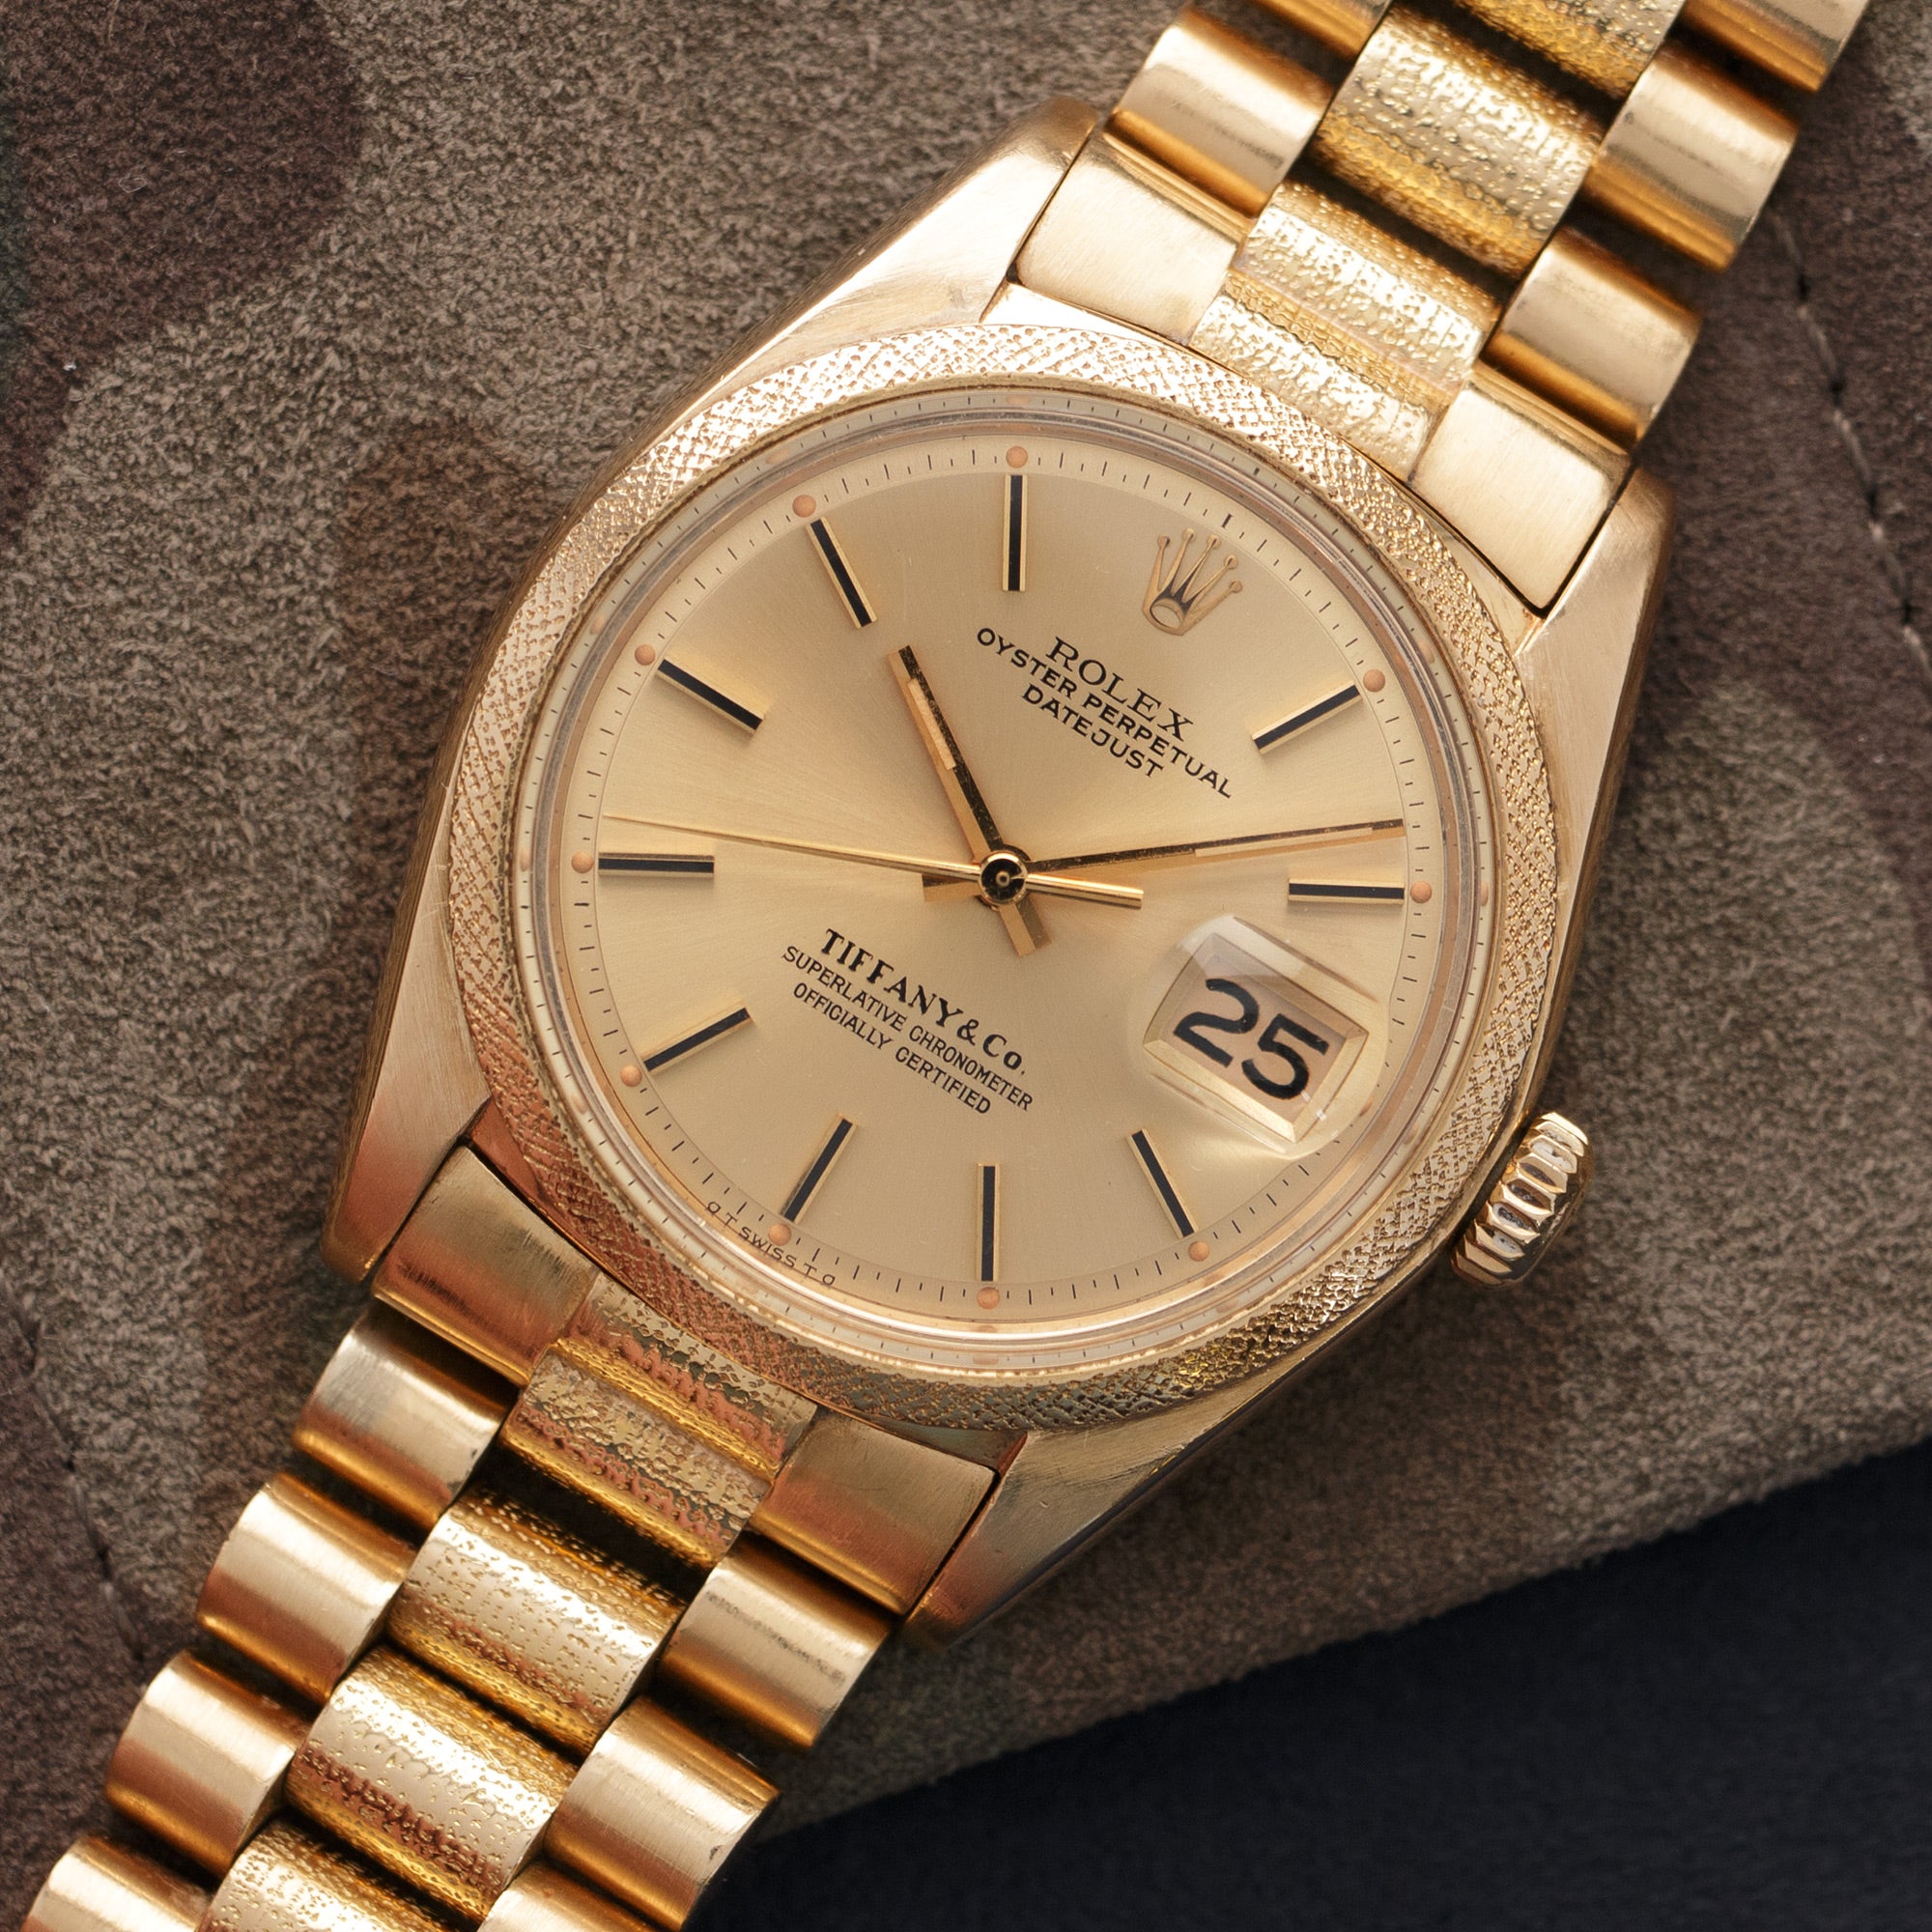 Rolex - Rolex Yellow Gold Datejust Watch Ref. 1611, Retailed by Tiffany & Co. - The Keystone Watches